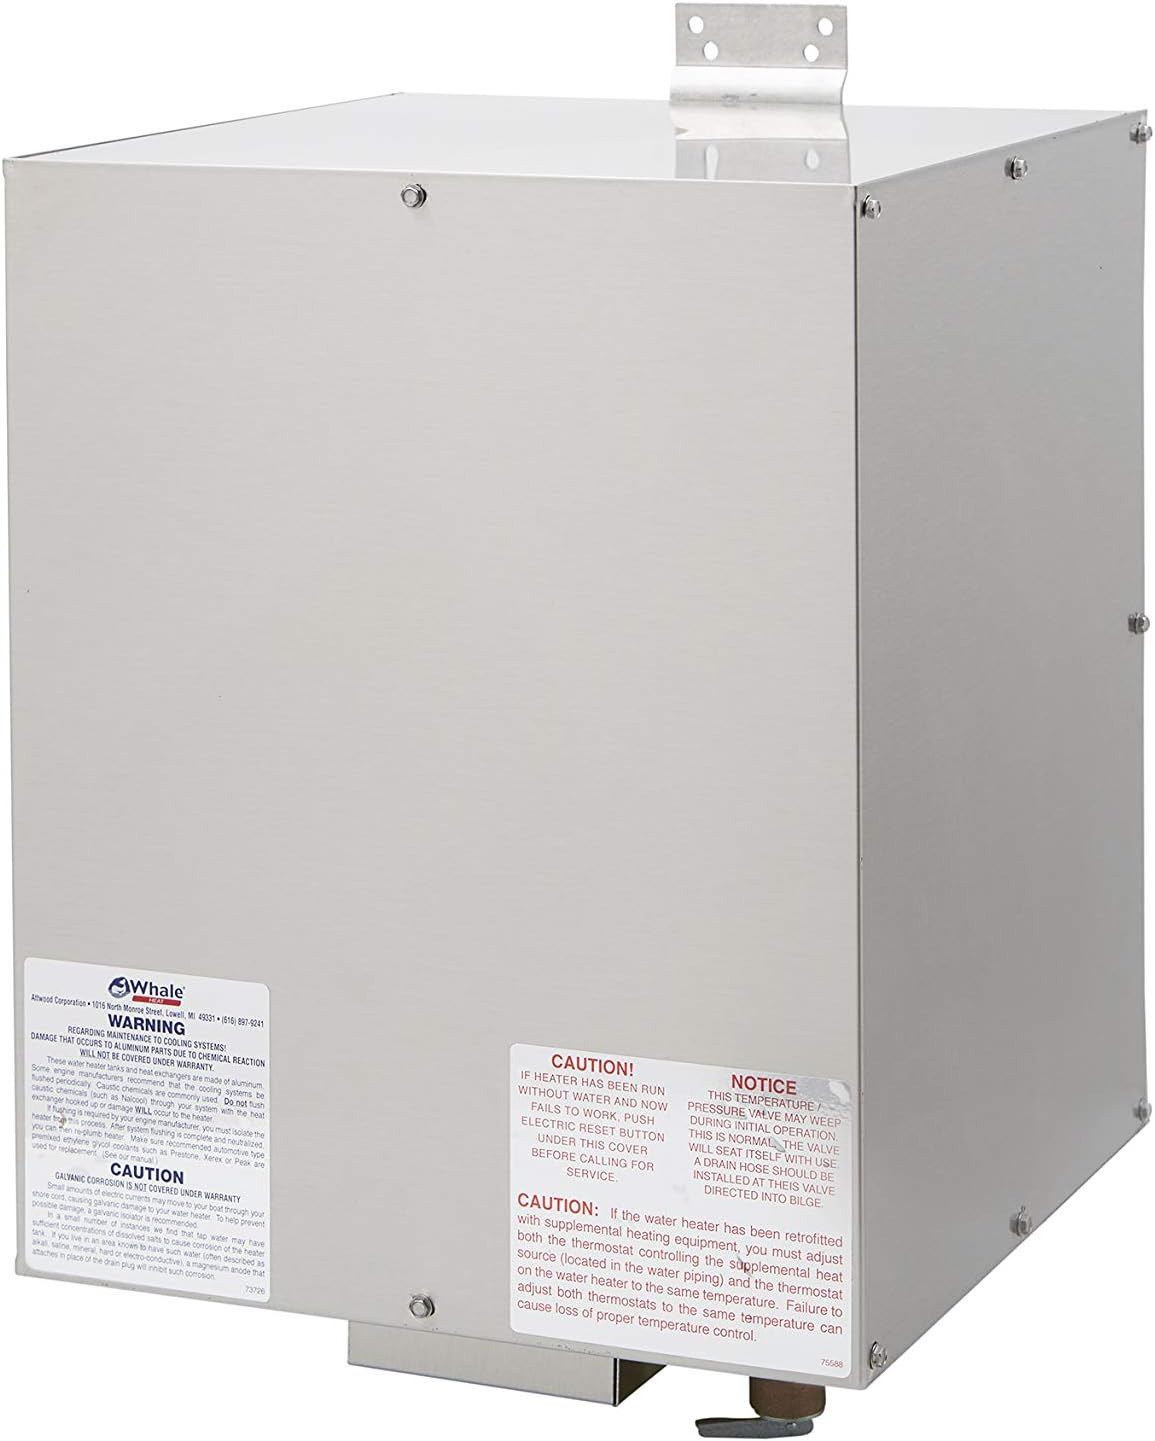 F700 Water Heater, 6 Gal, 120V, 100 PSI, Horizontal Mount, Double-Wall Front Hea